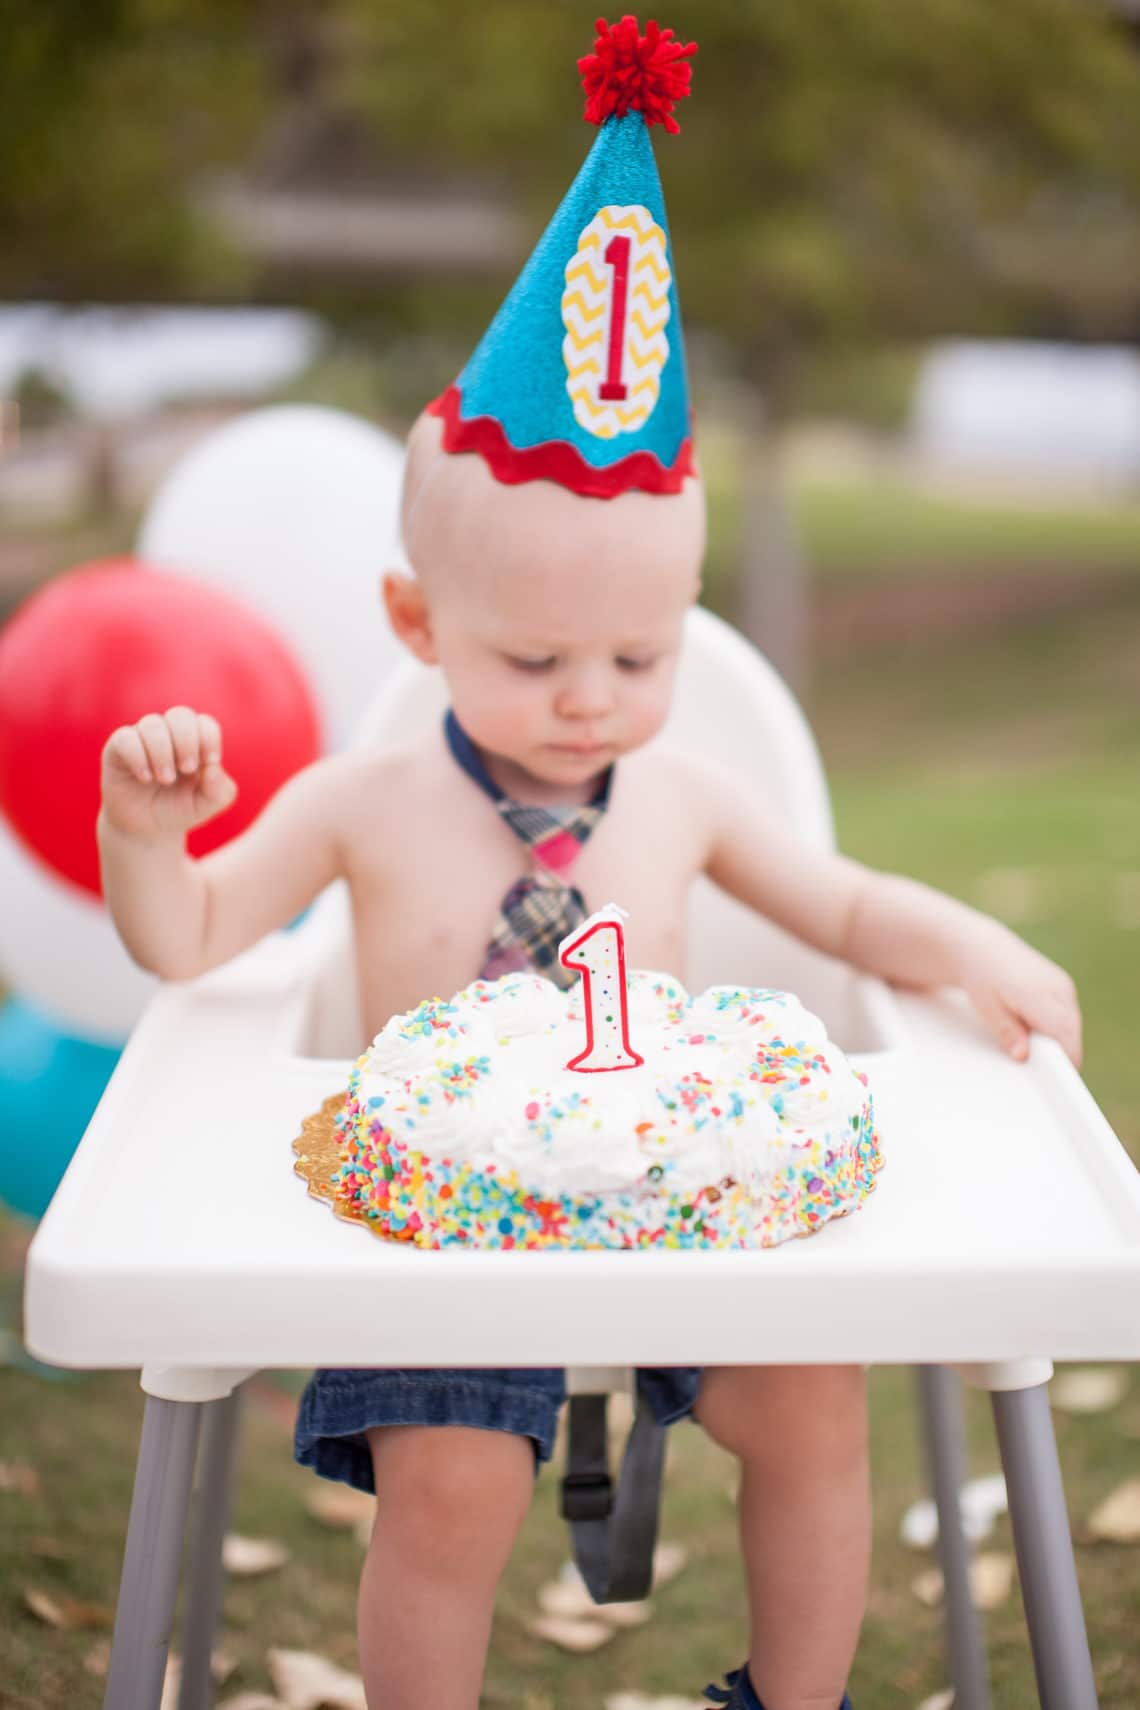 Baby First Birthday: 10 Reasons to Have a 1st Birthday Party - Friday We're In Love